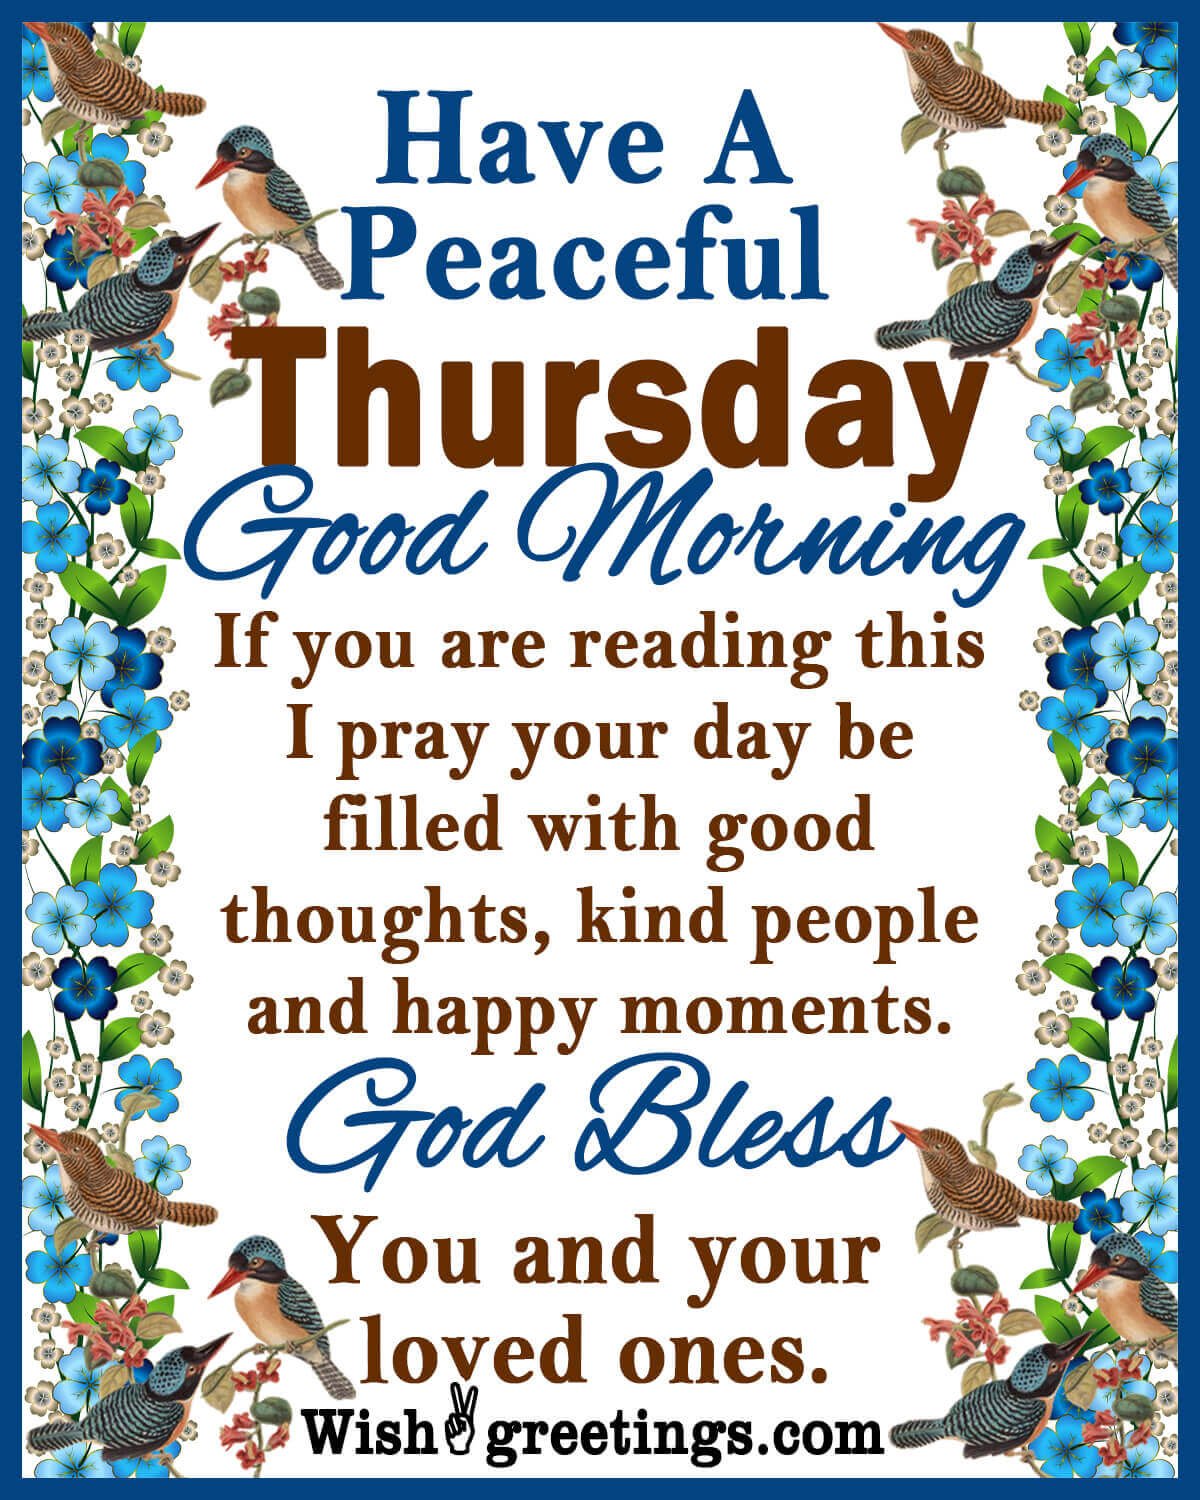 Best Thursday Morning Wishes Quotes - Wish Greetings